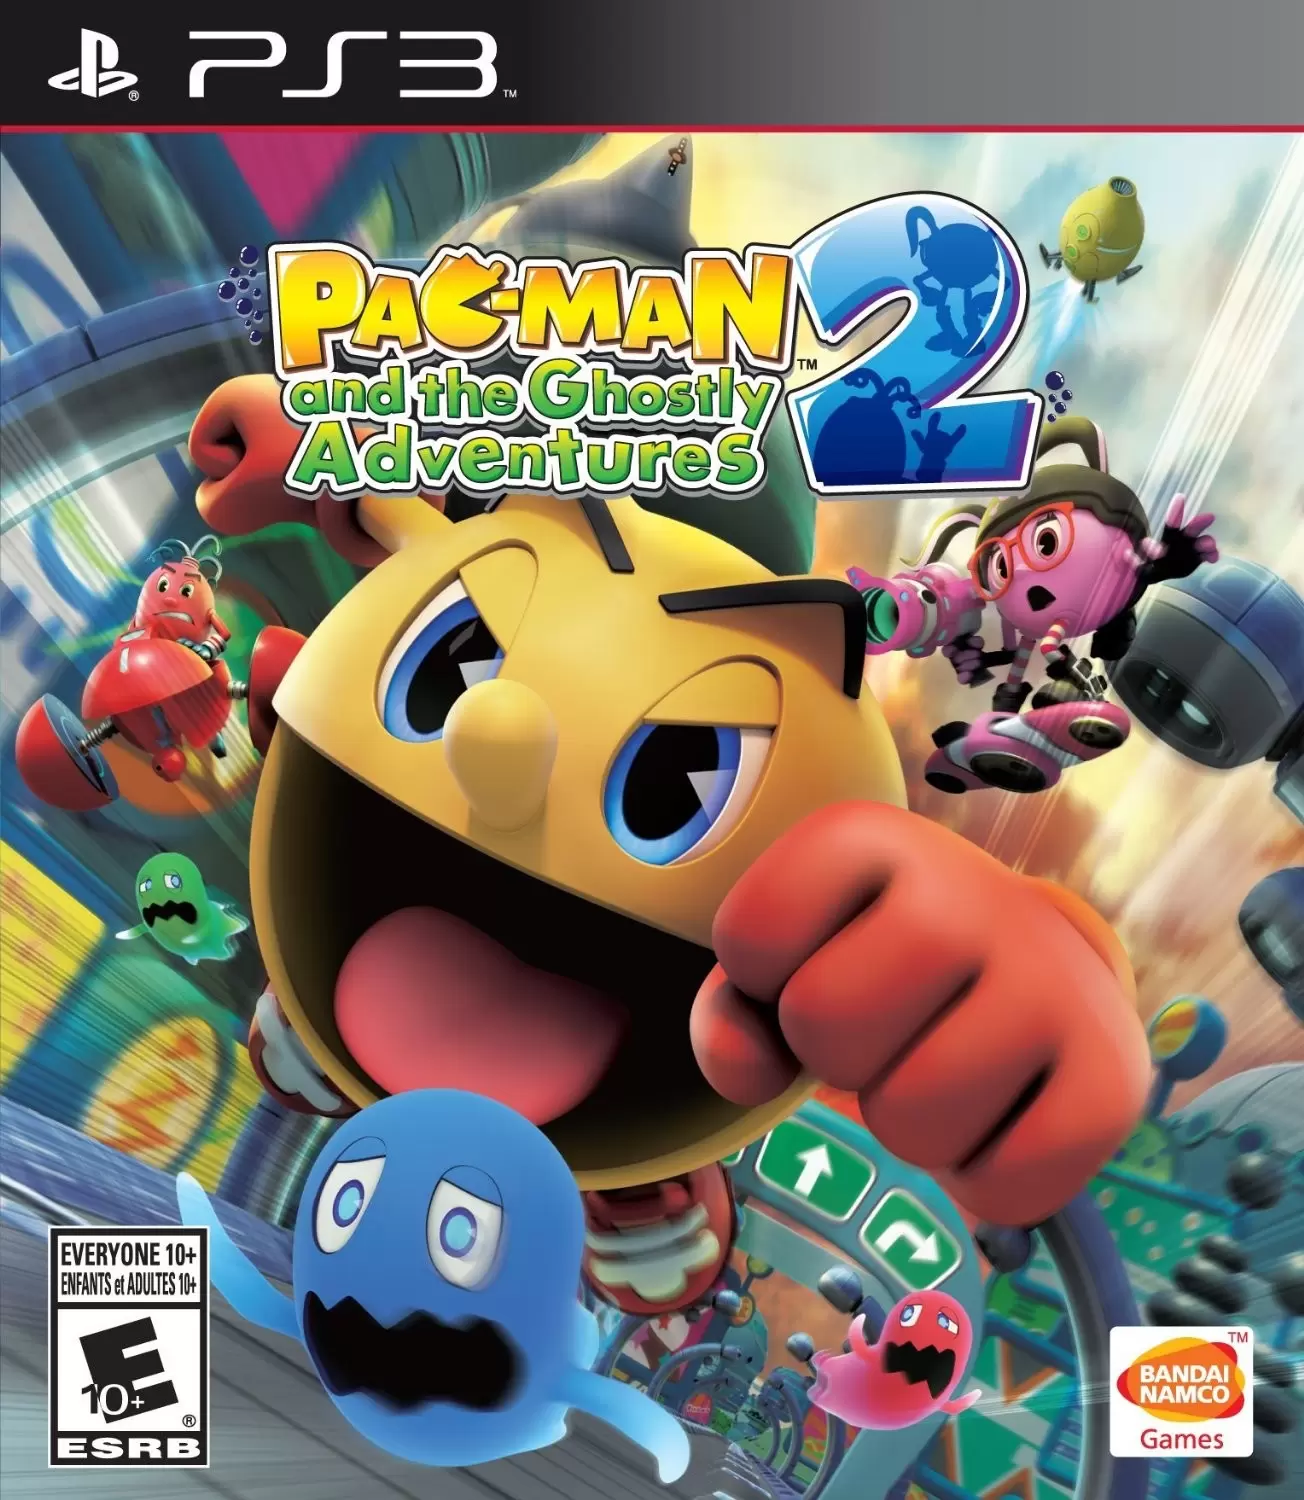 PS3 Games - Pac-Man and the Ghostly Adventures 2